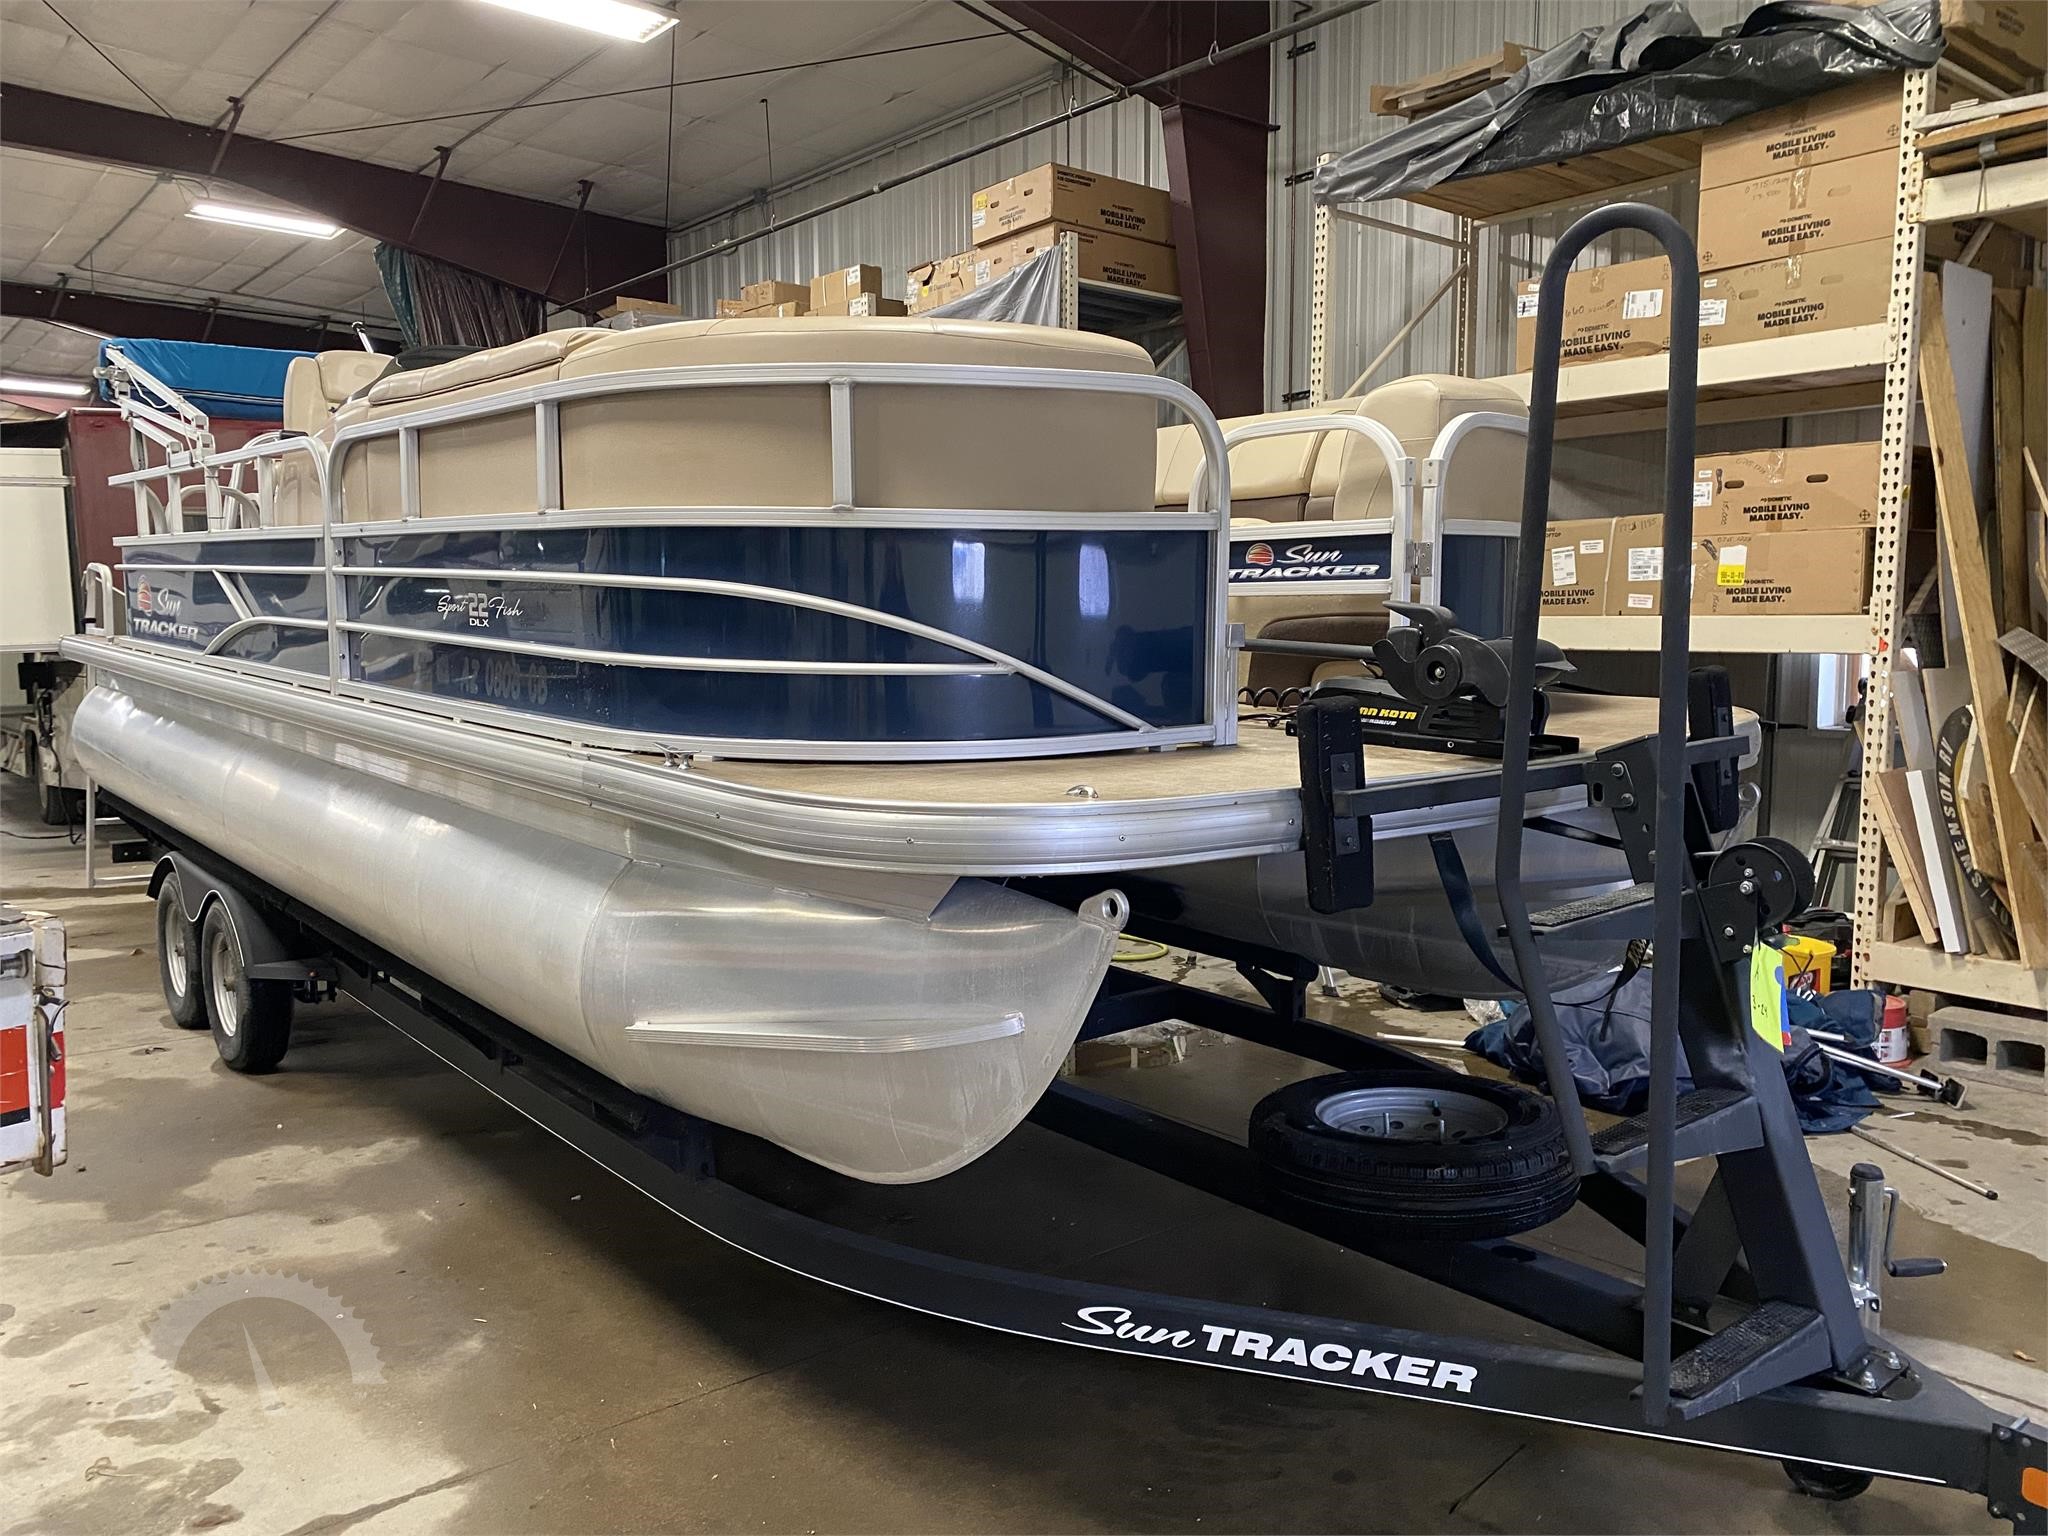 New to us boat. 18ft with 2006 90hp. I put the bimini tops on. : r/boating